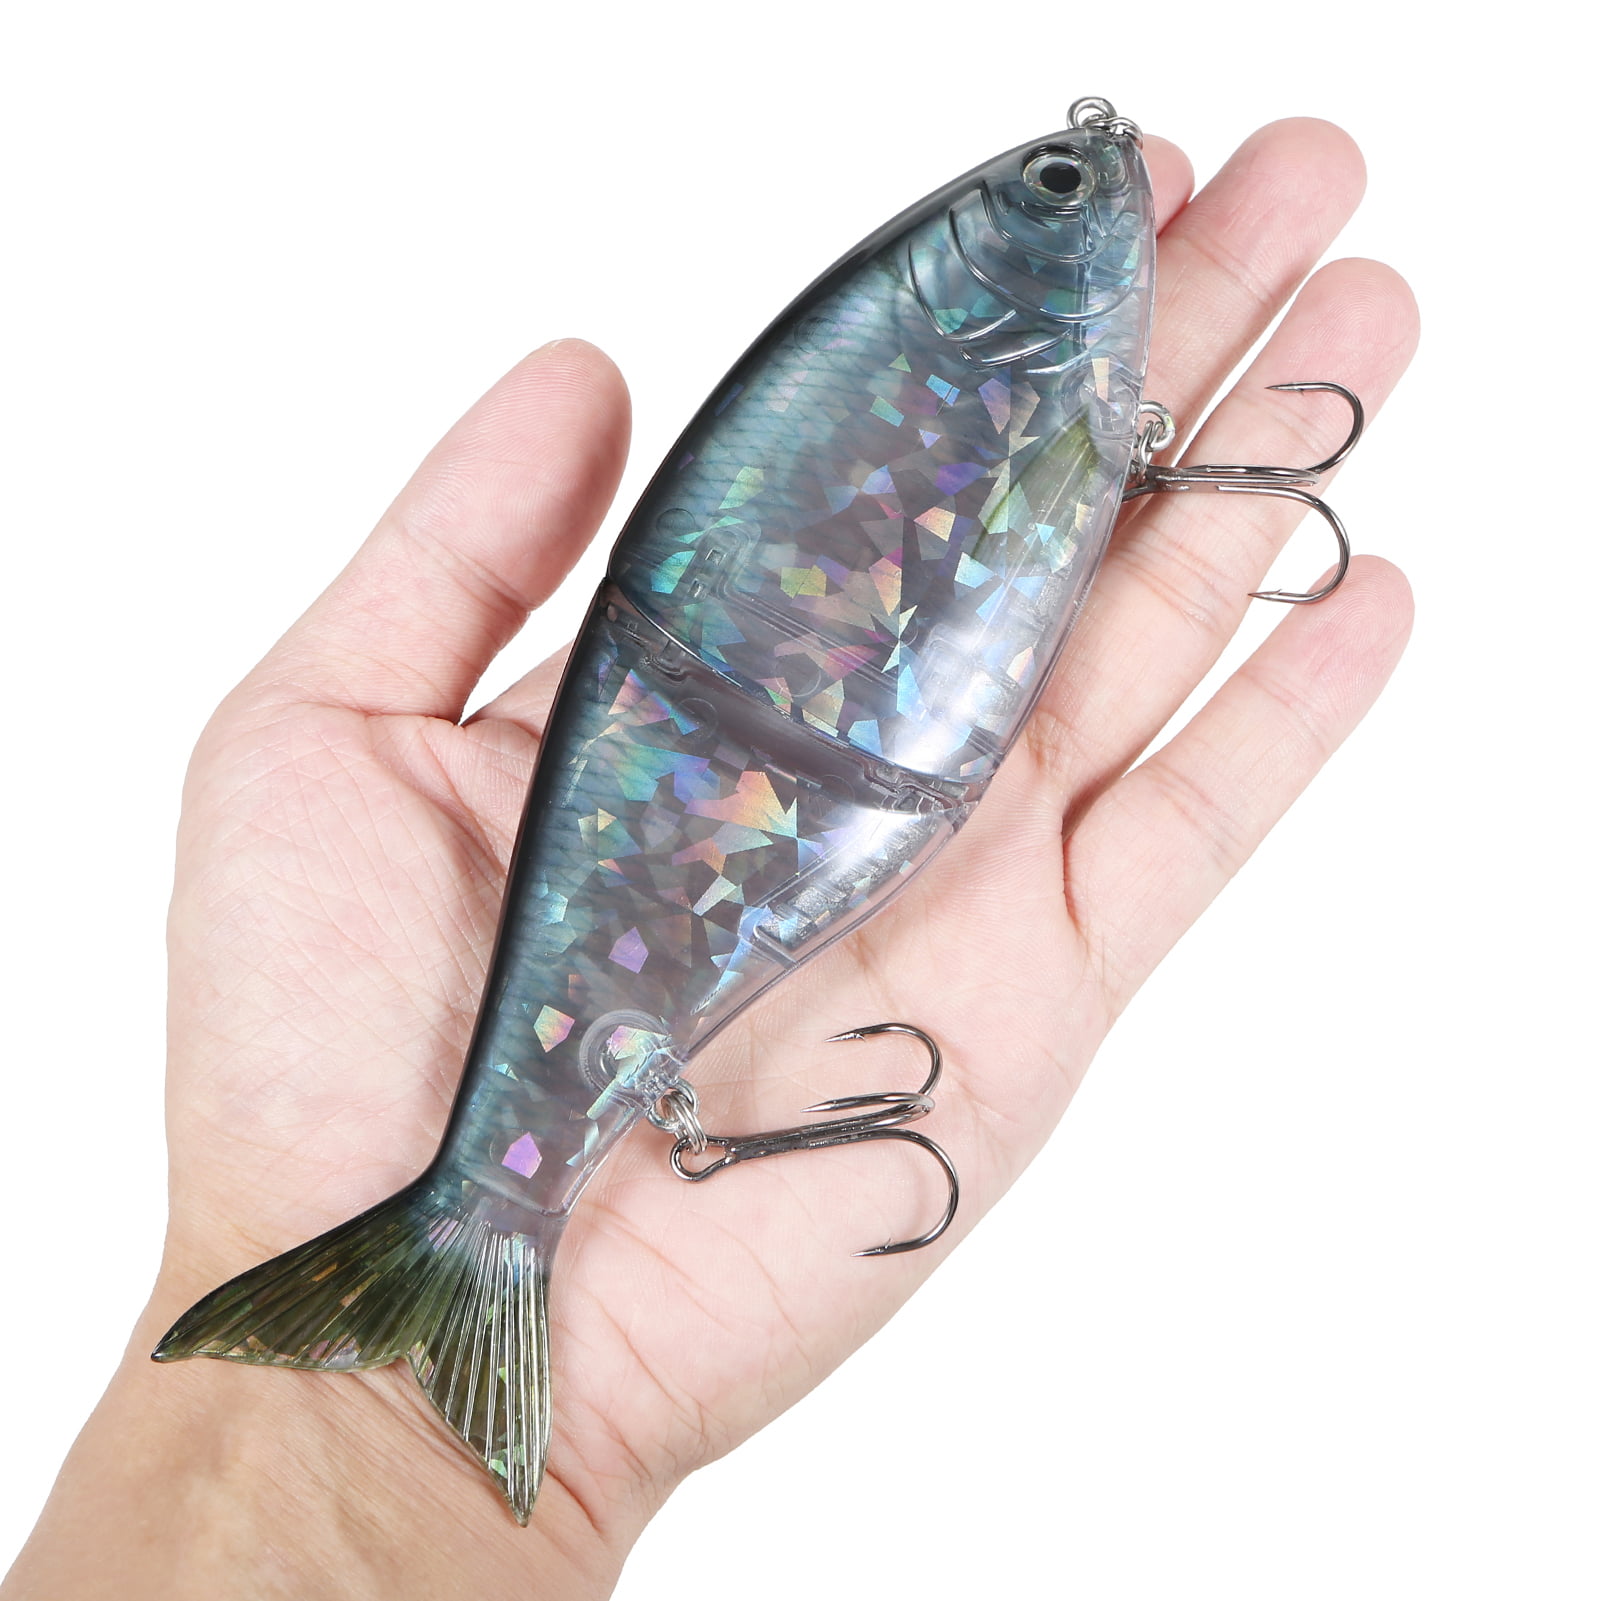 Taruor TARUOR Glider Fishing Lures 178mm Glide Bait Jointed Swimbait  Artificial Hard Baits Lures with Treble Hooks 